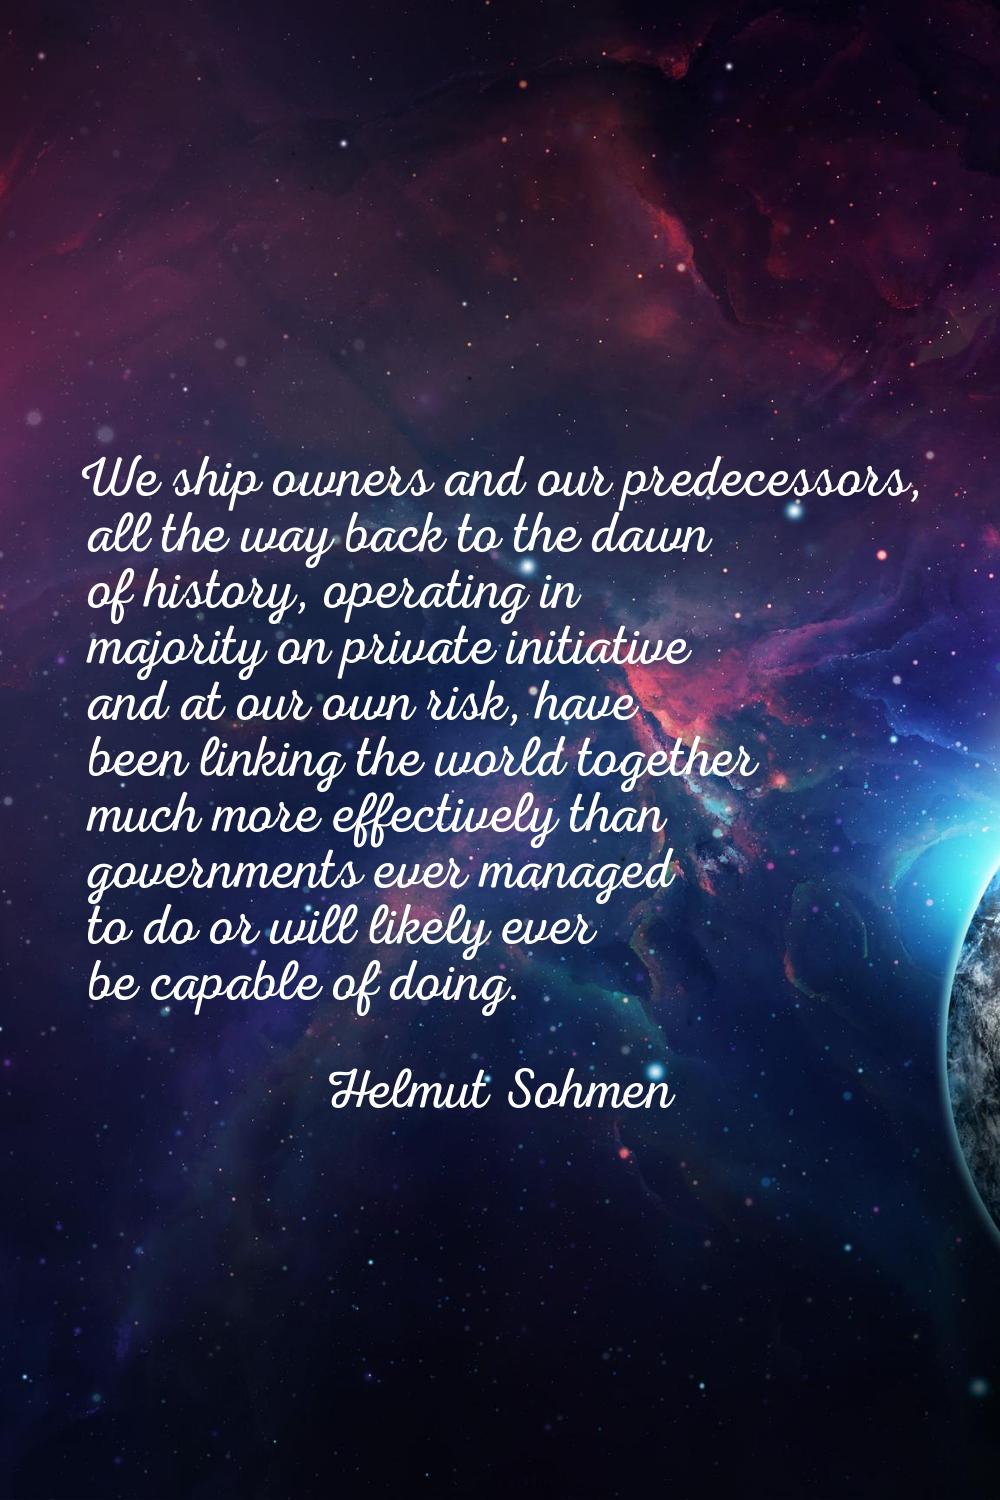 We ship owners and our predecessors, all the way back to the dawn of history, operating in majority